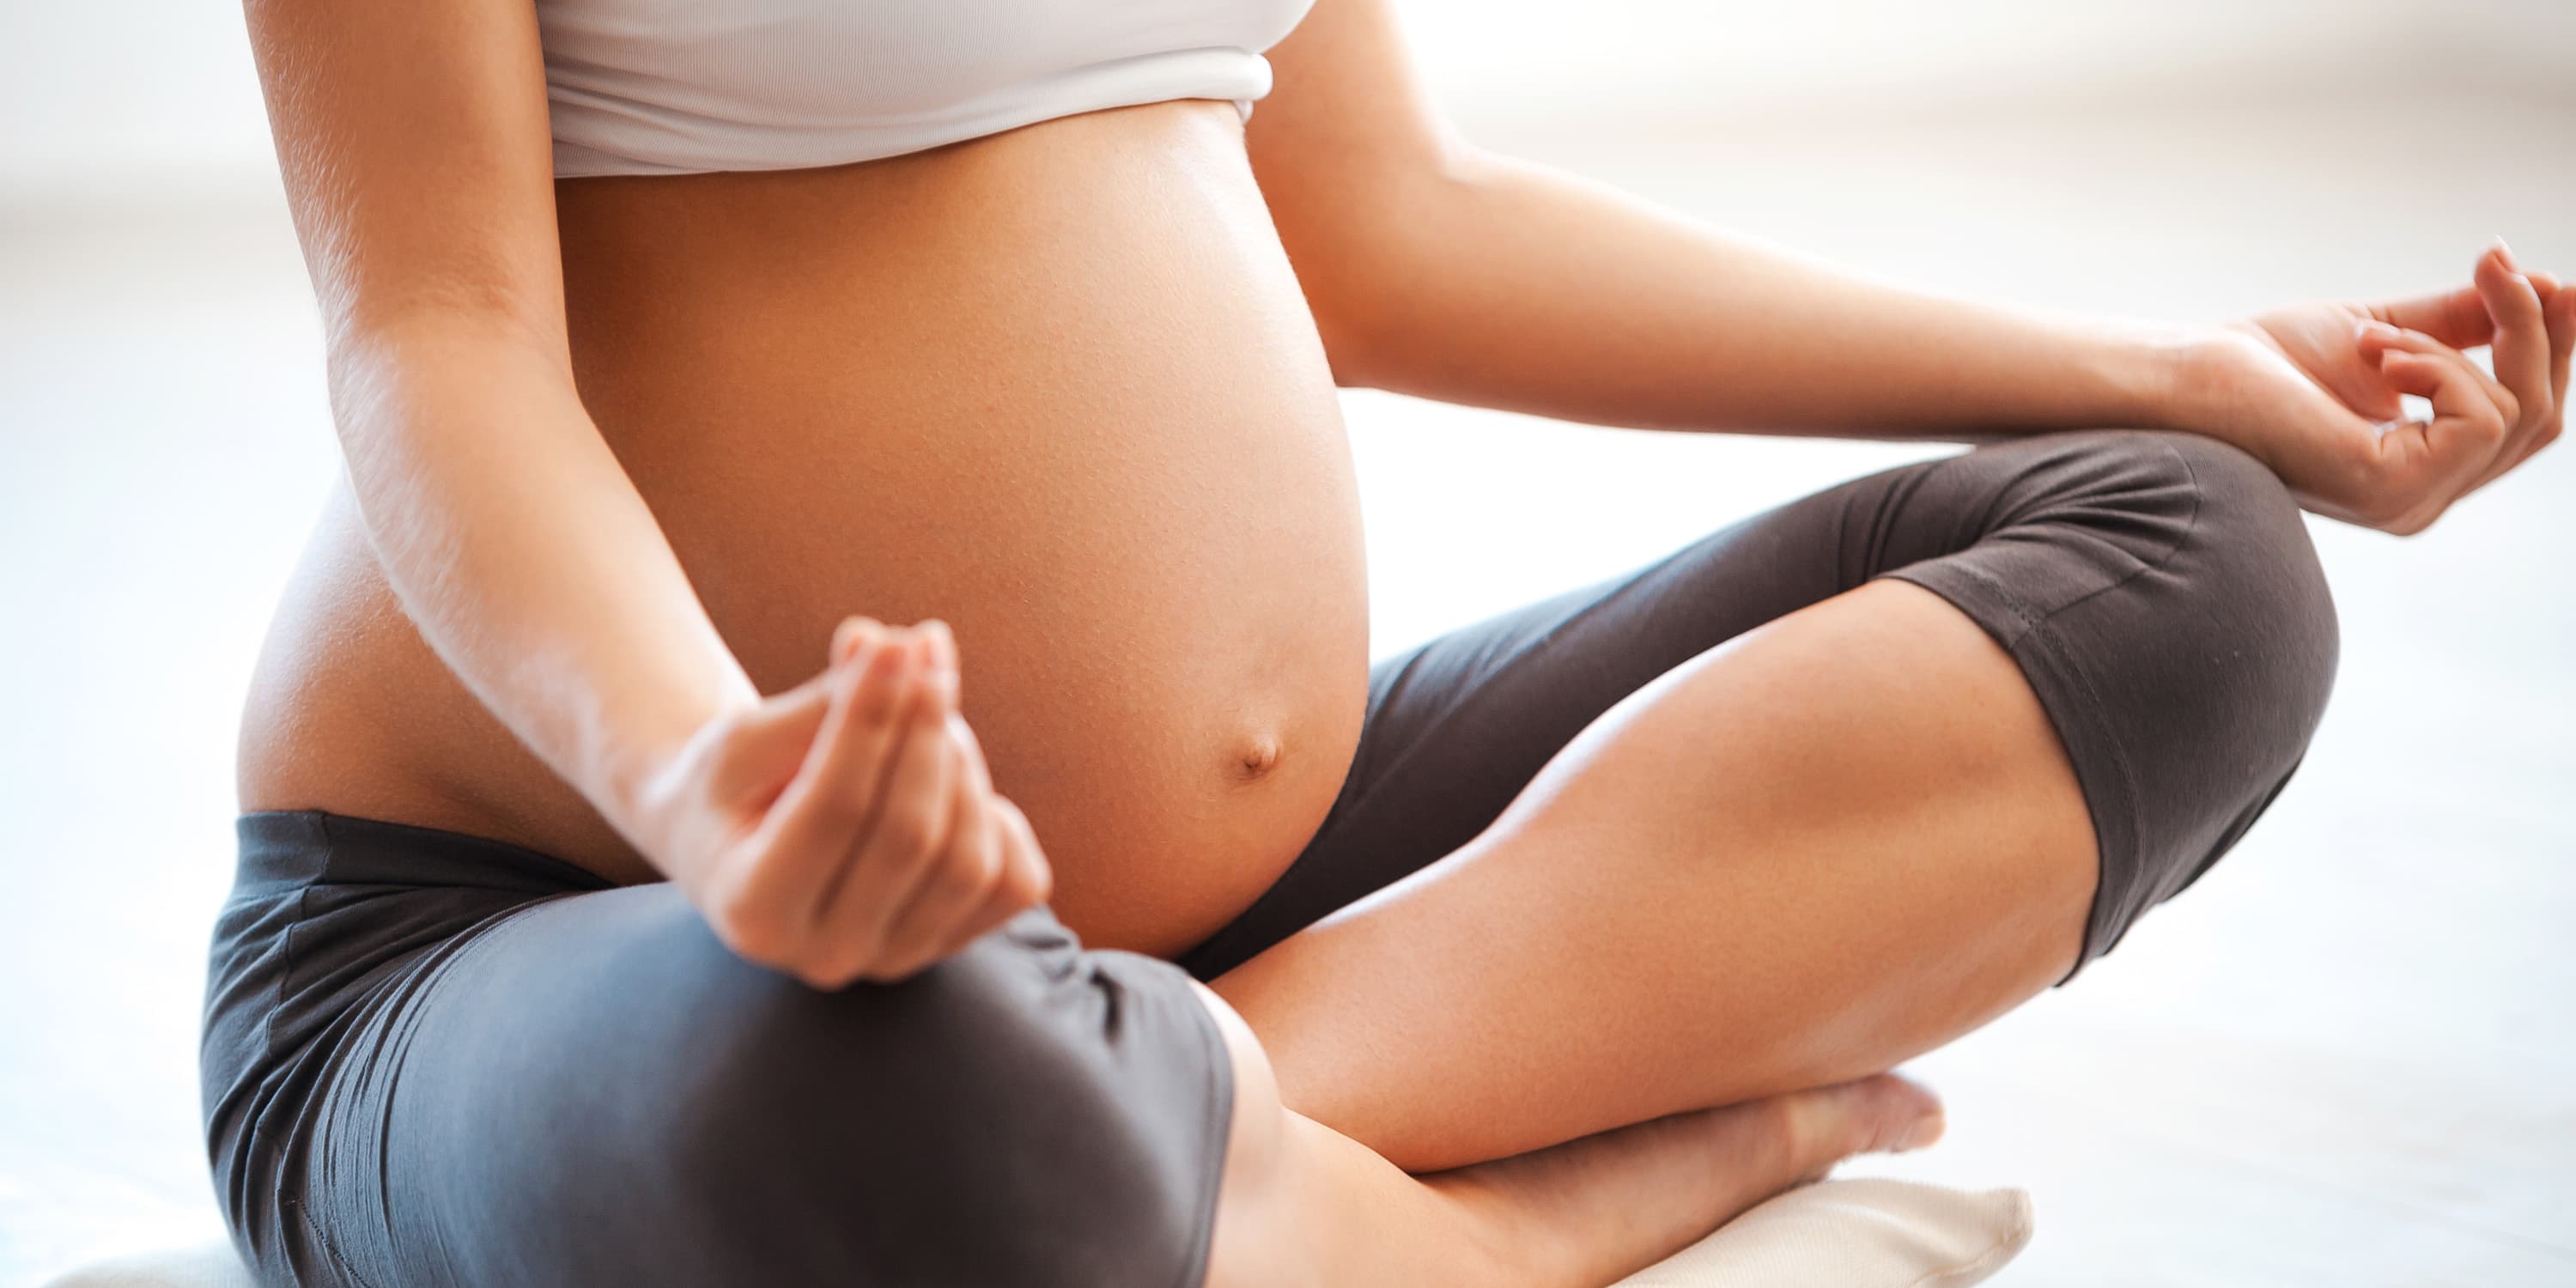 Pregnant woman sitting in yoga position on floor